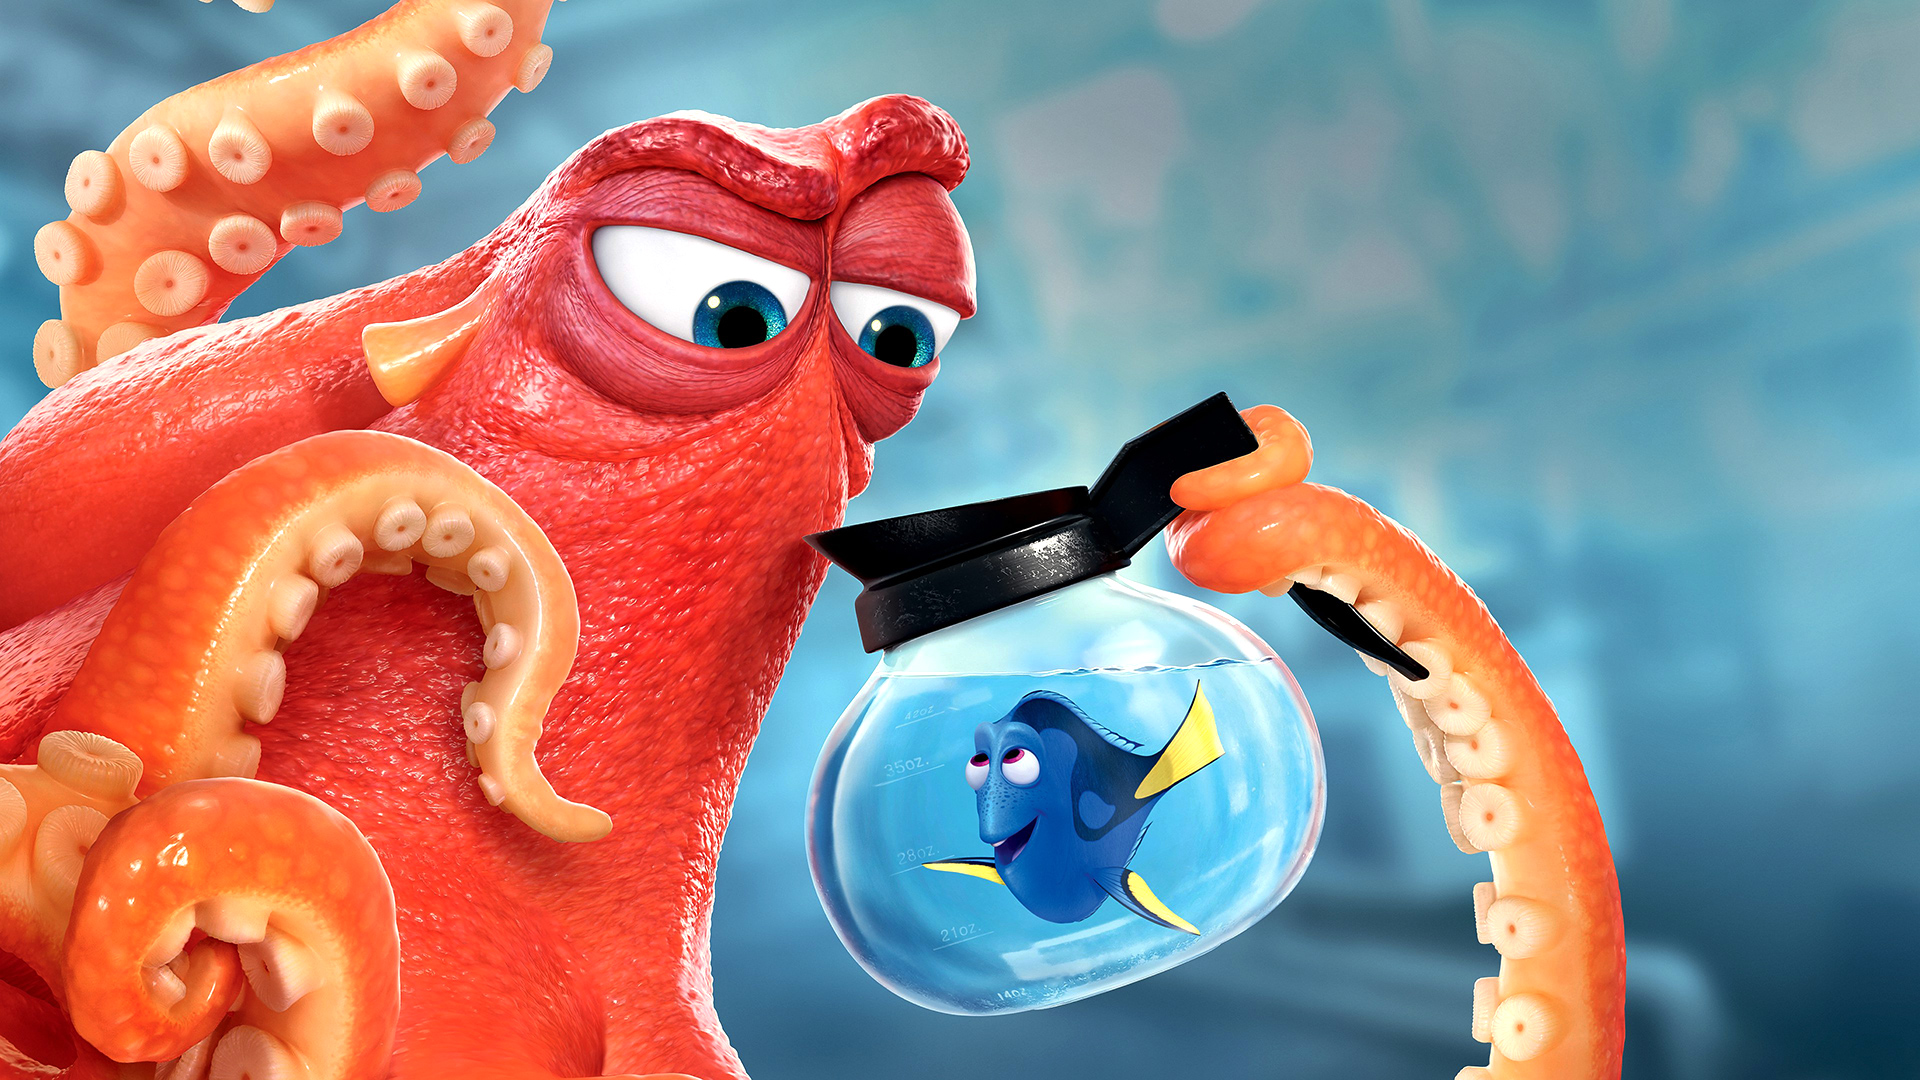 Desktop Wallpaper Finding Dory Animated Movie, Fish, Octopus, Hd Image